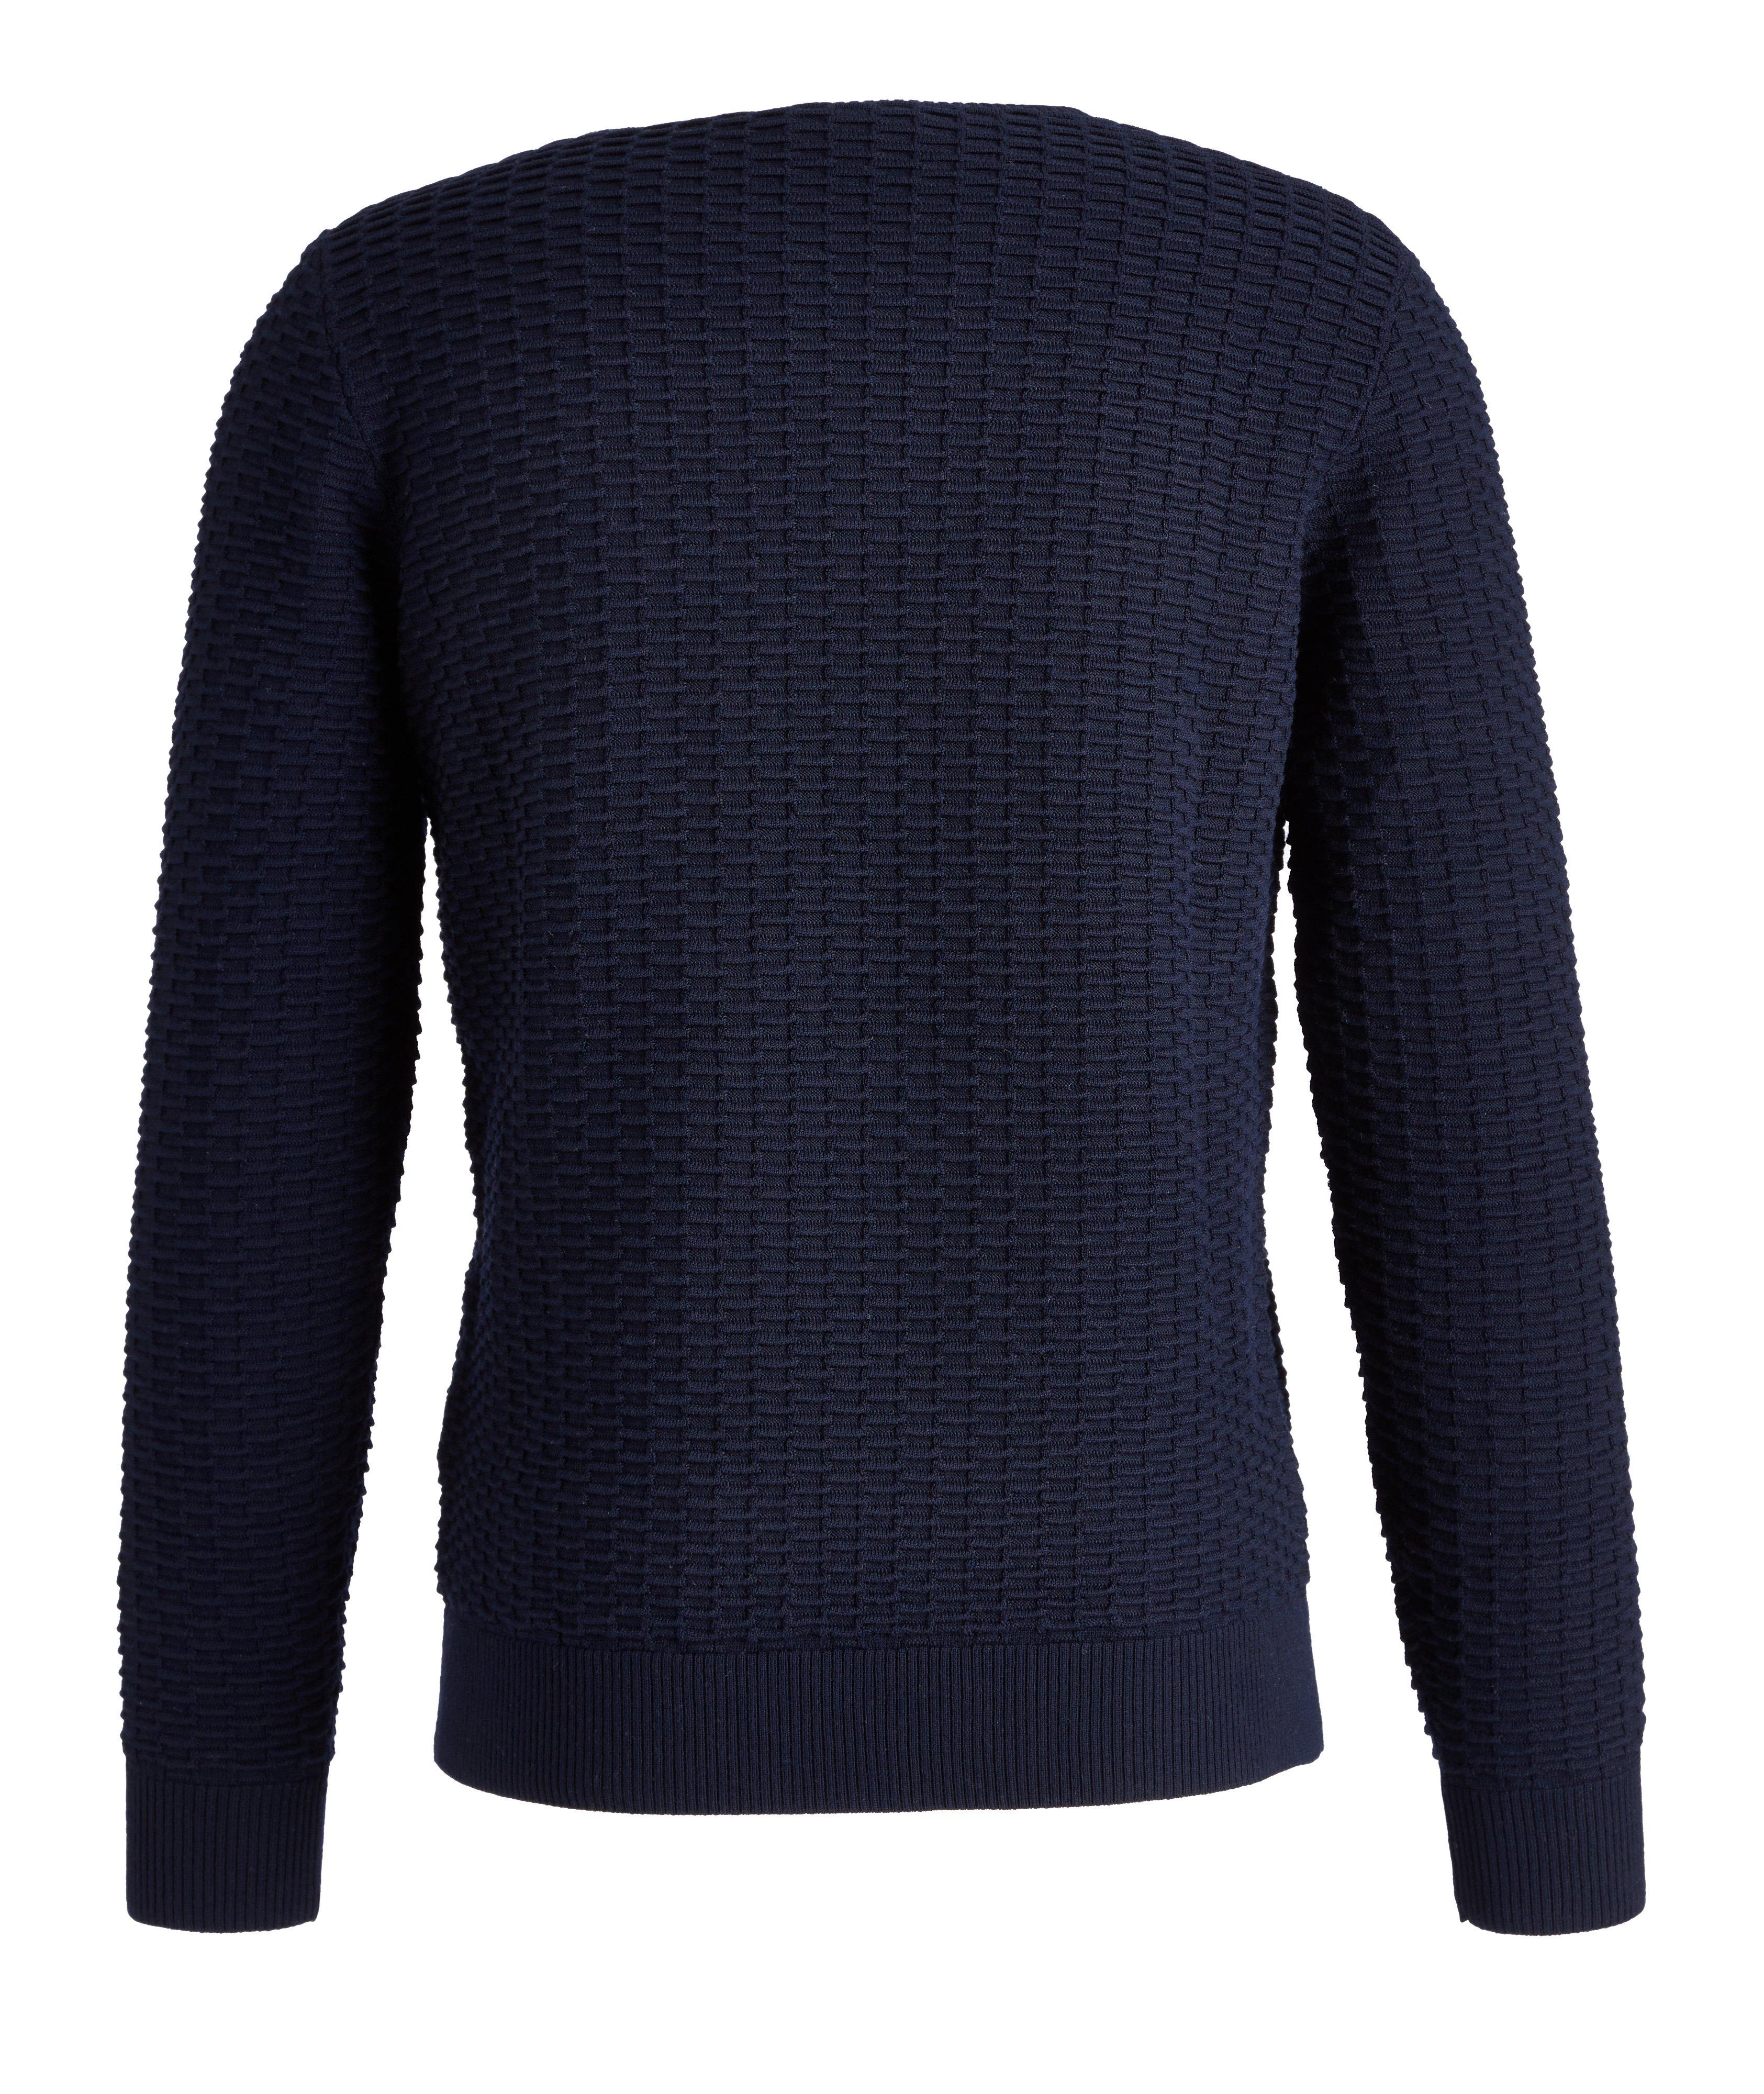 Textured Knit Wool-Blend Sweater image 1